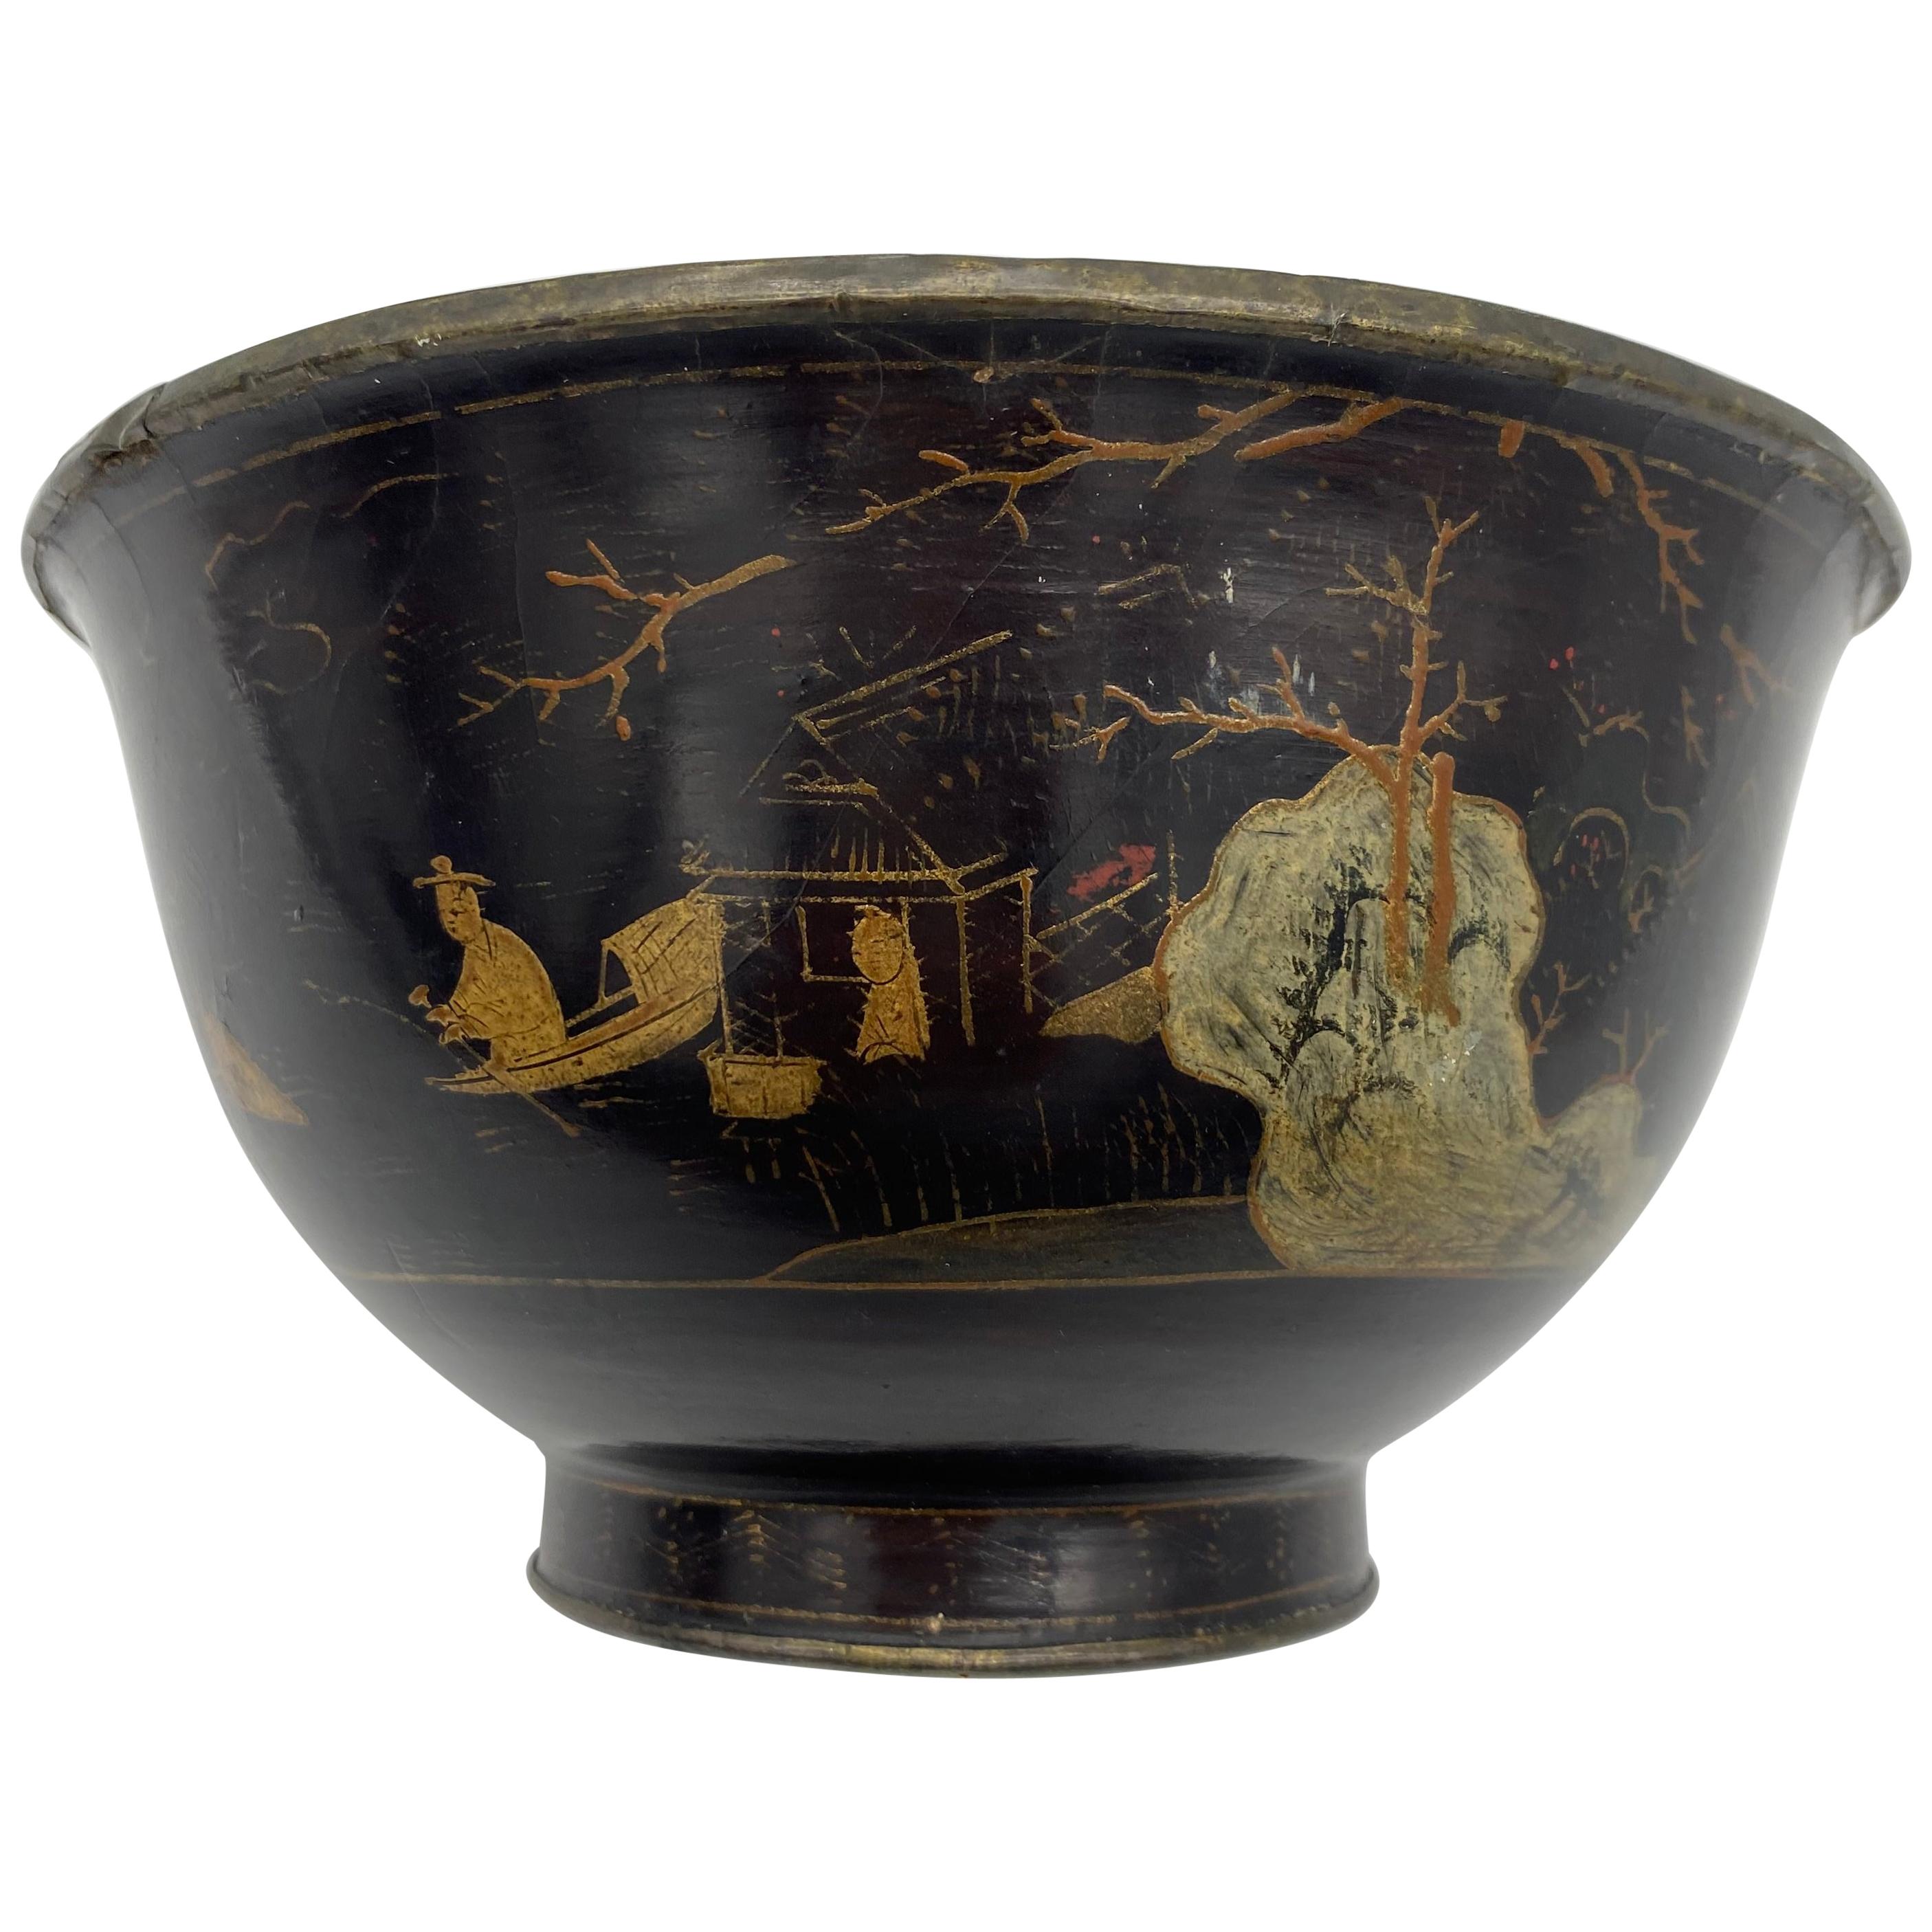 18th Century Chinese Lacquer Bowl with Pewter